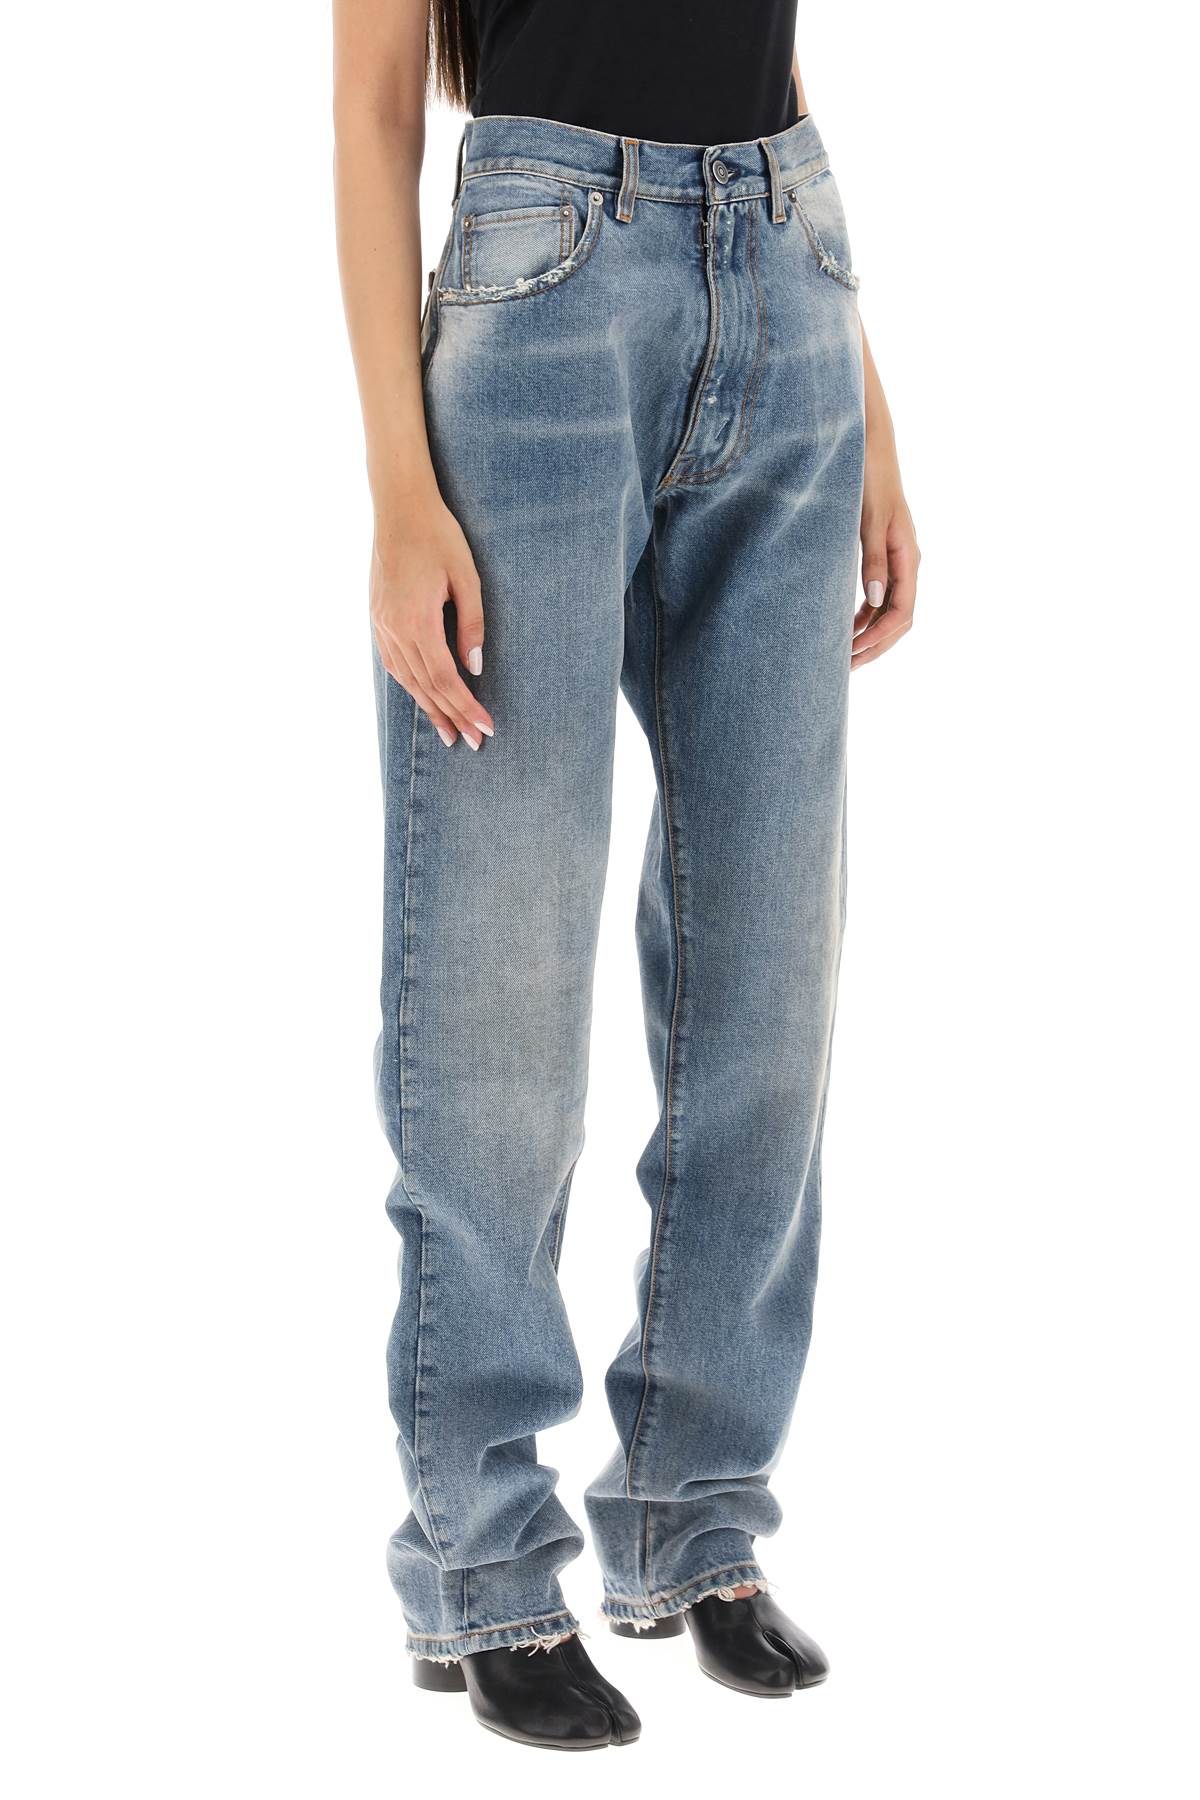 MAISON MARGIELA LOOSE JEANS WITH STRAIGHT CUT